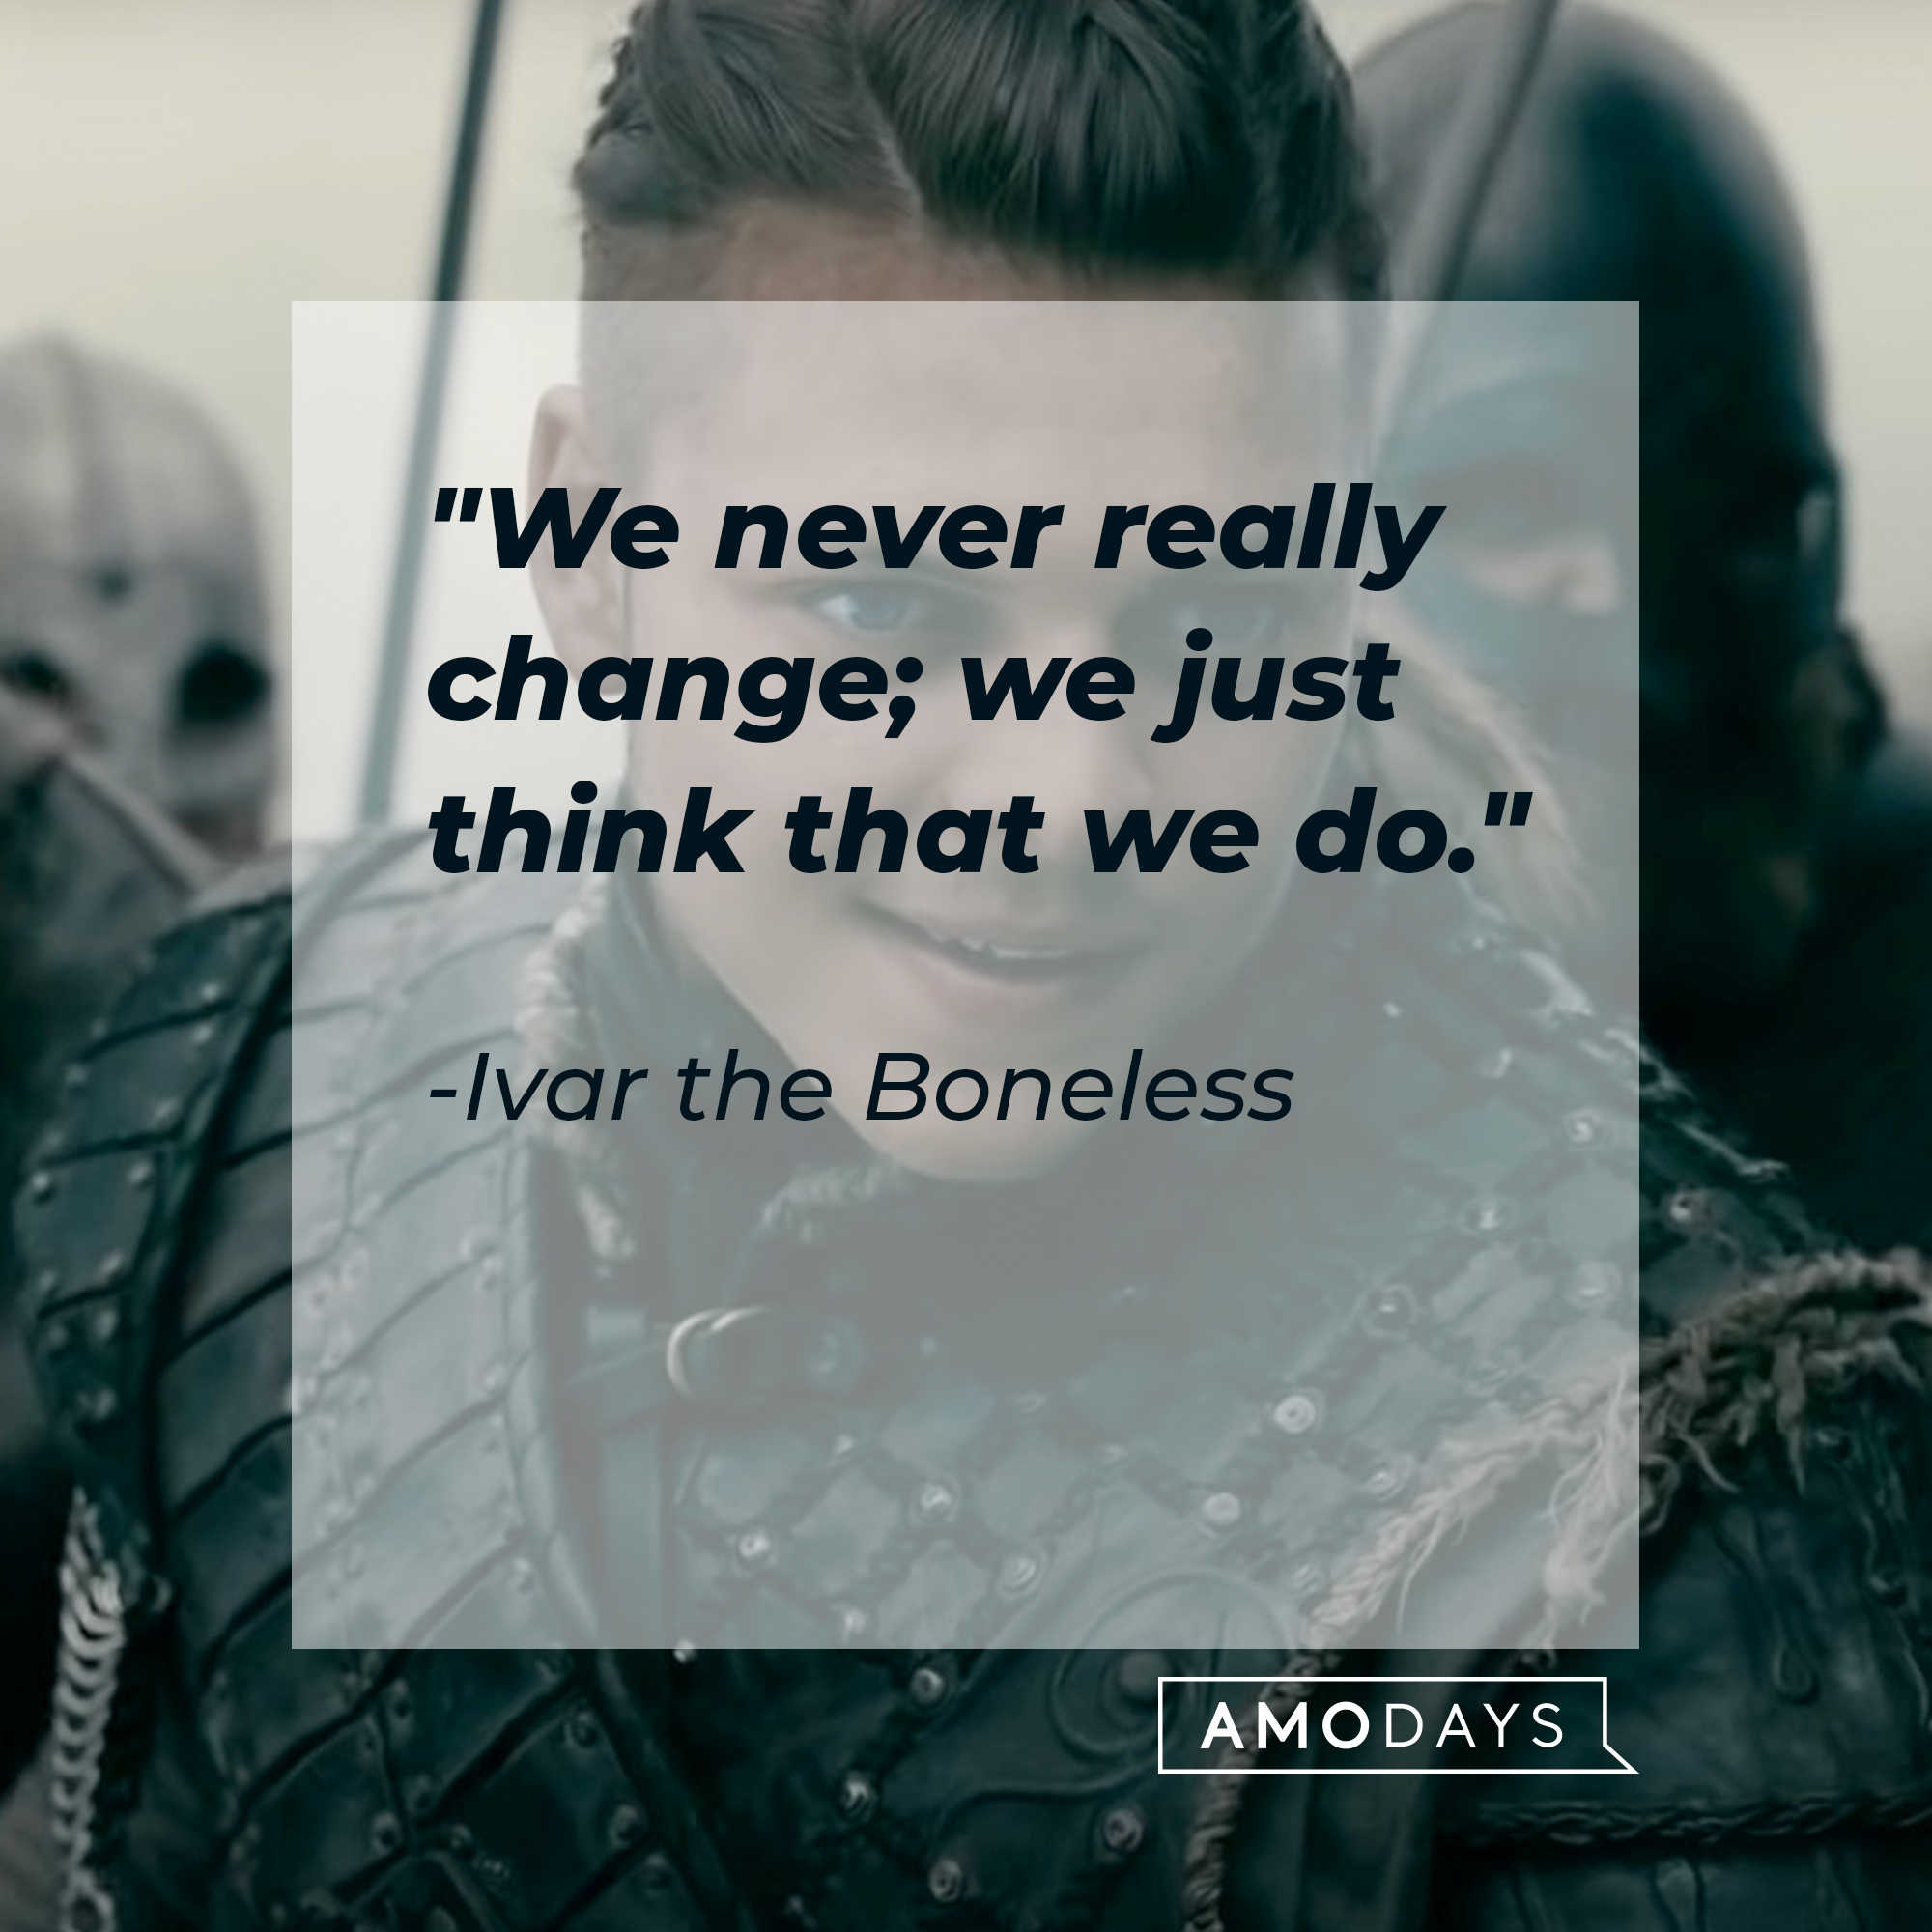 A picture of Ivar the Boneless with his quote: "We never really change; we just think that we do."┃Source: youtube.com/PrimeVideoUK